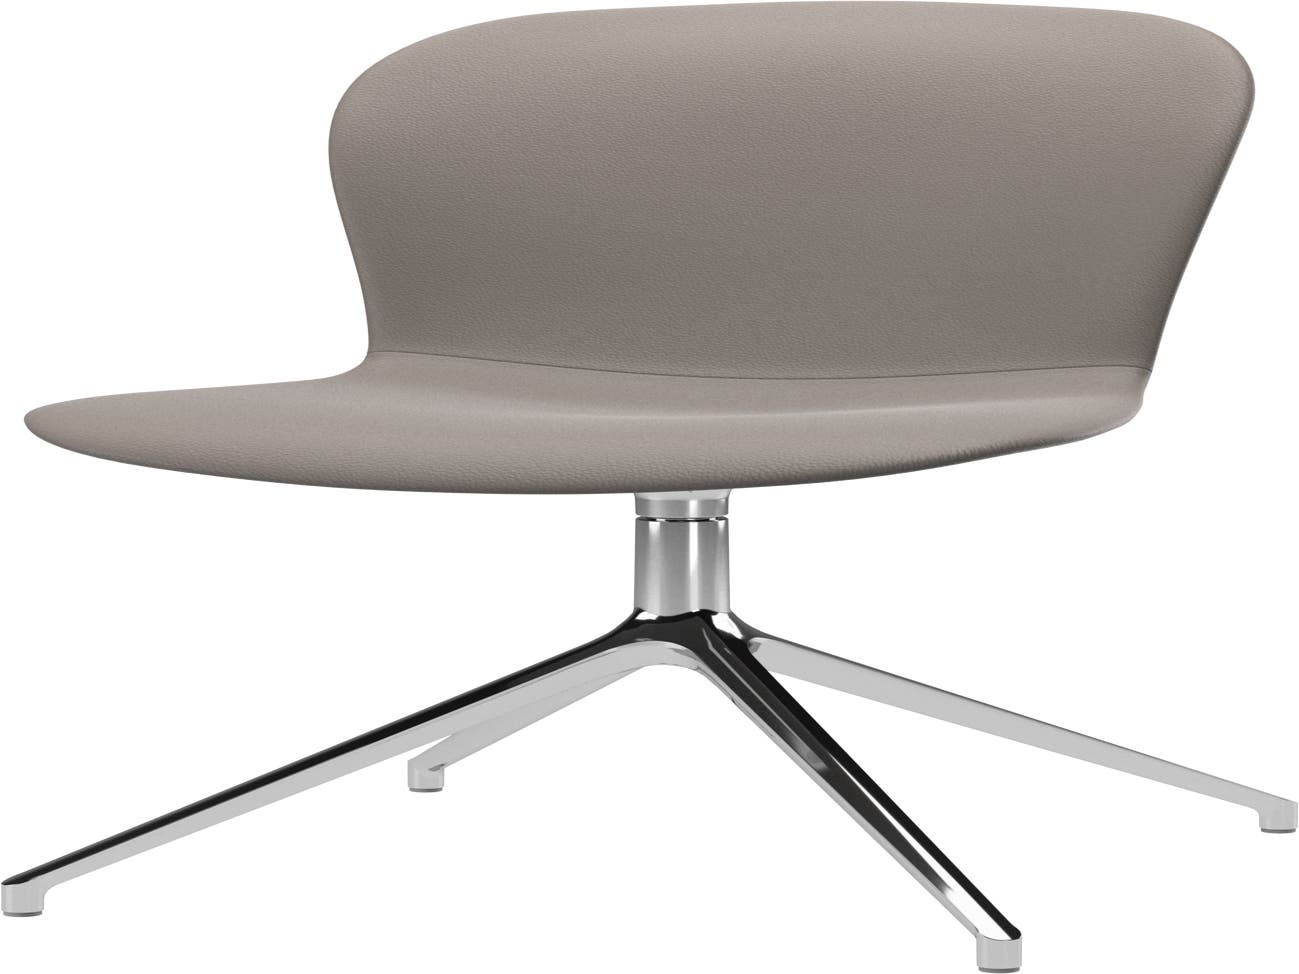 Adelaide chair with swivel function | BoConcept